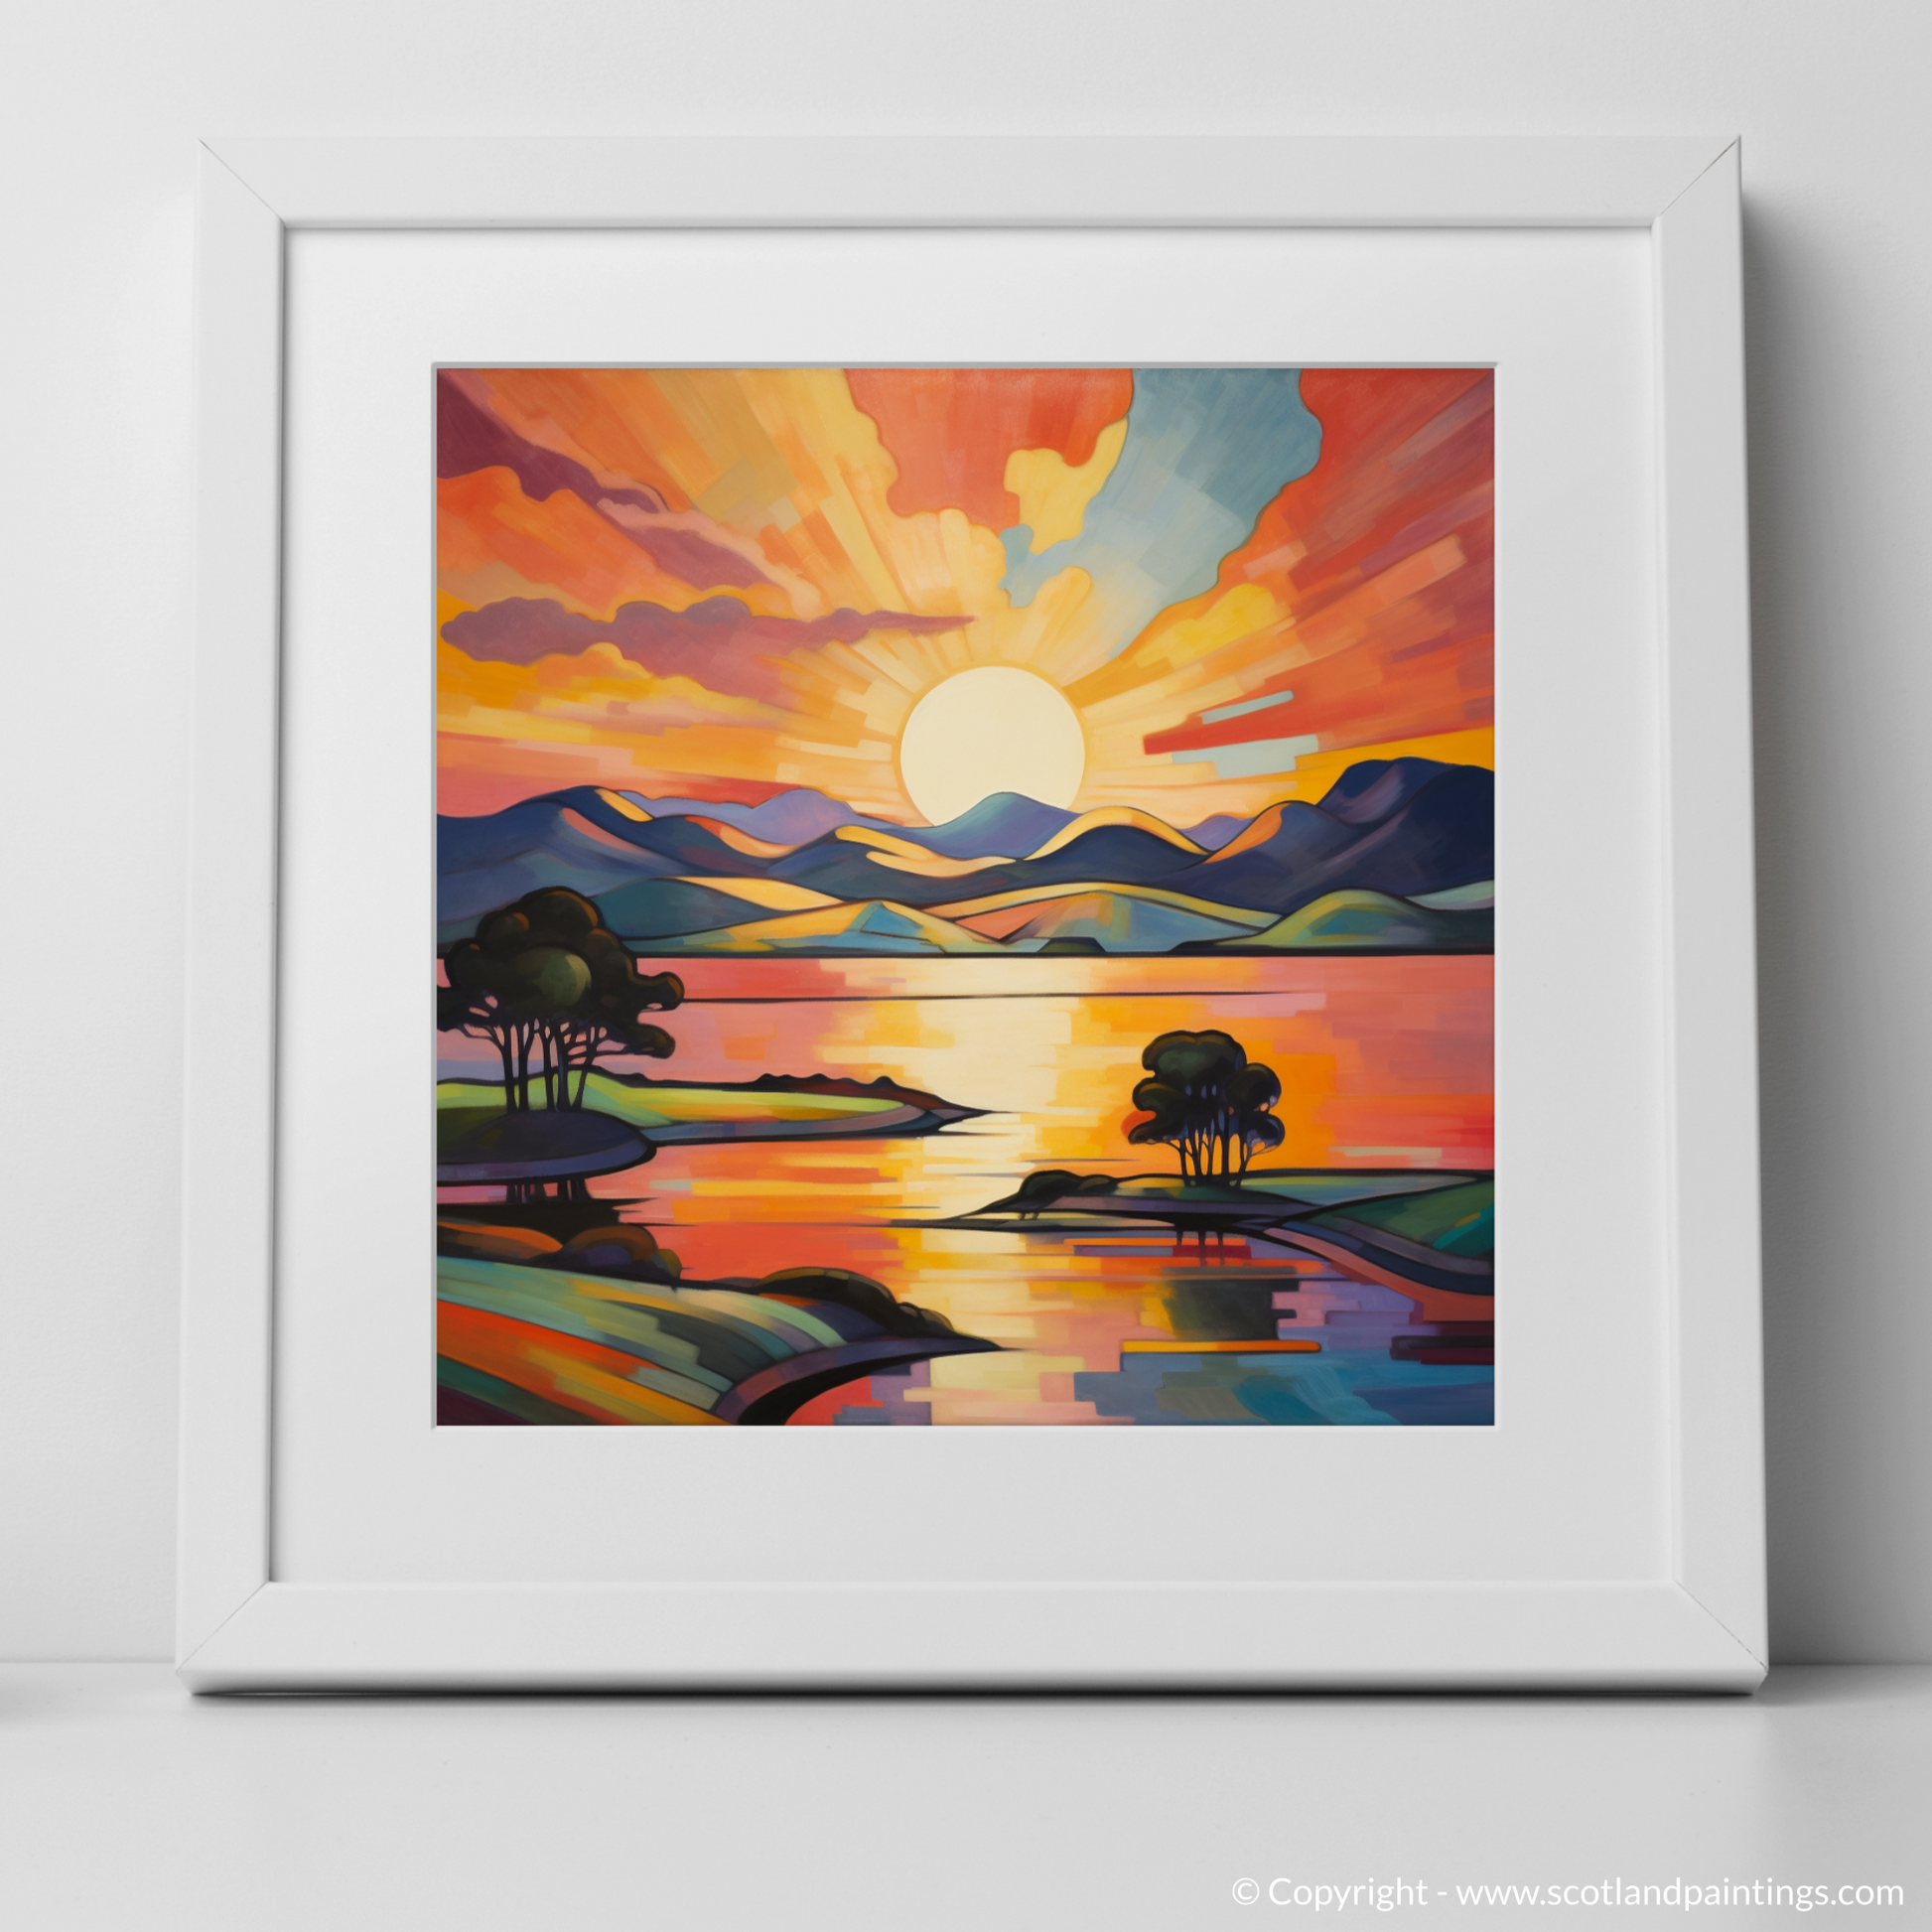 Art Print of Sunset over Loch Lomond with a white frame